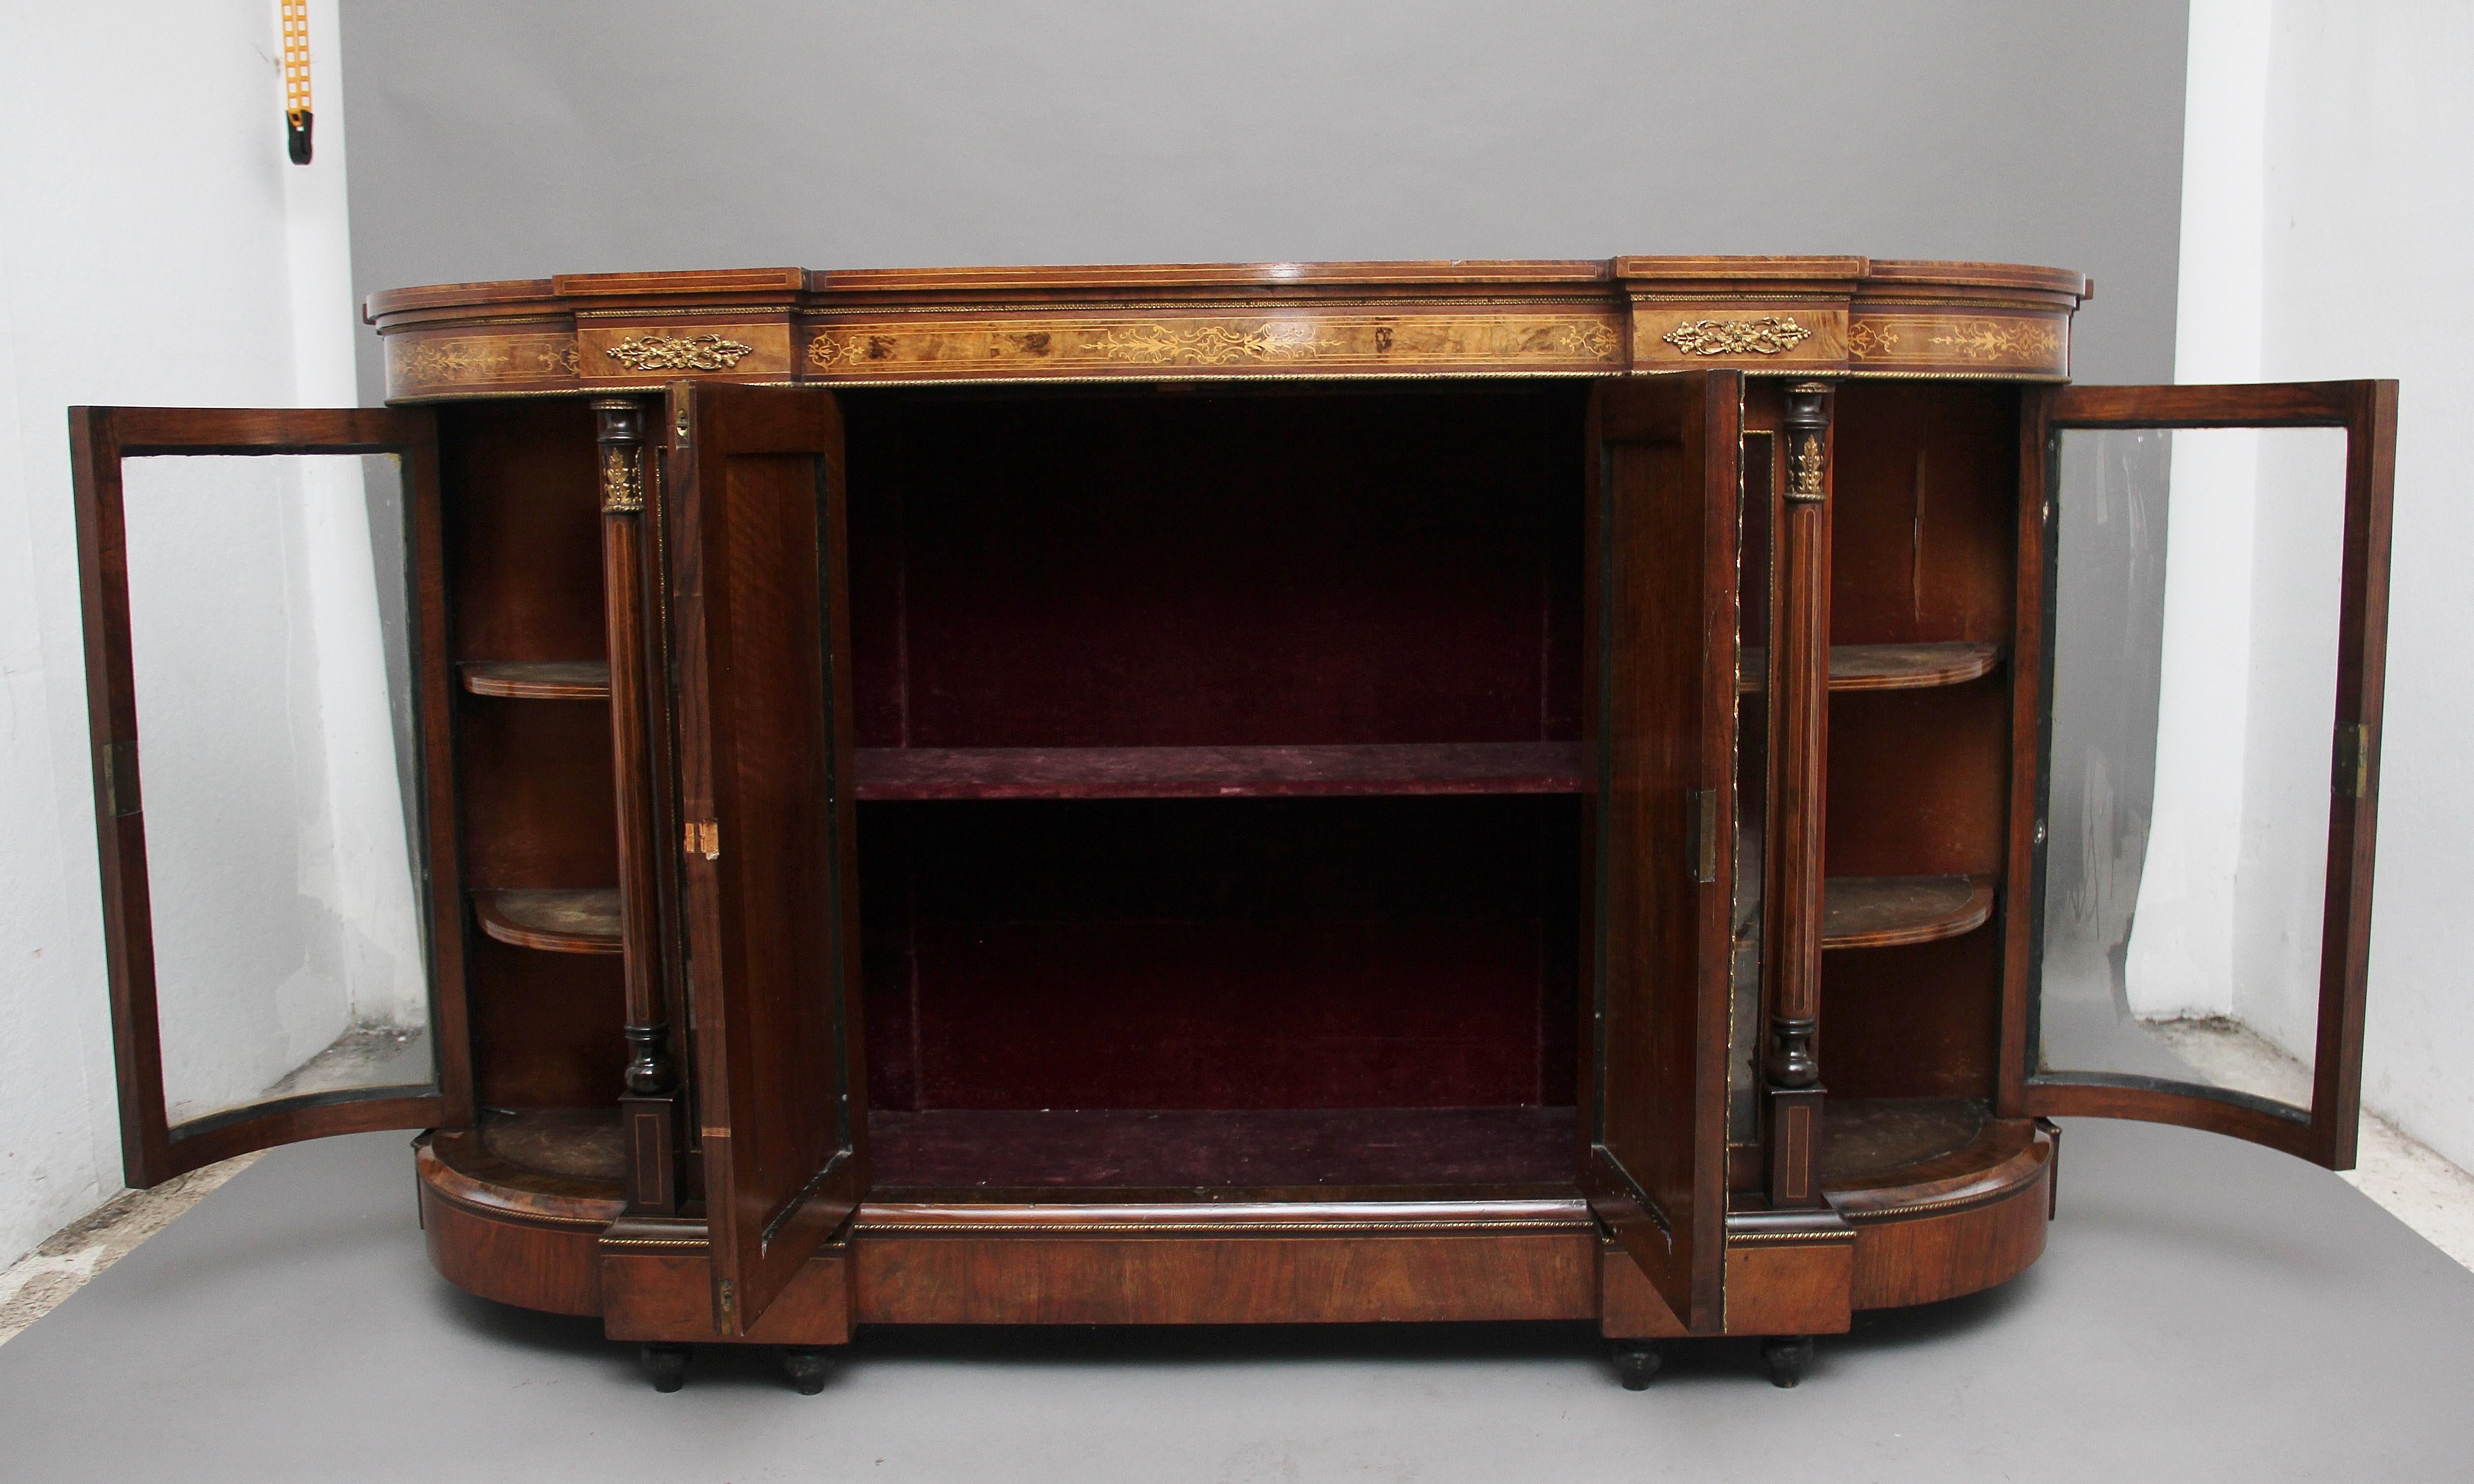 A fabulous quality 19th century burr walnut and inlaid breakfront credenza, the shaped, crossbanded and wonderfully figured top above an inlaid frieze decorated with ormolu beading and mounts, with two cupboard doors at the centre which have